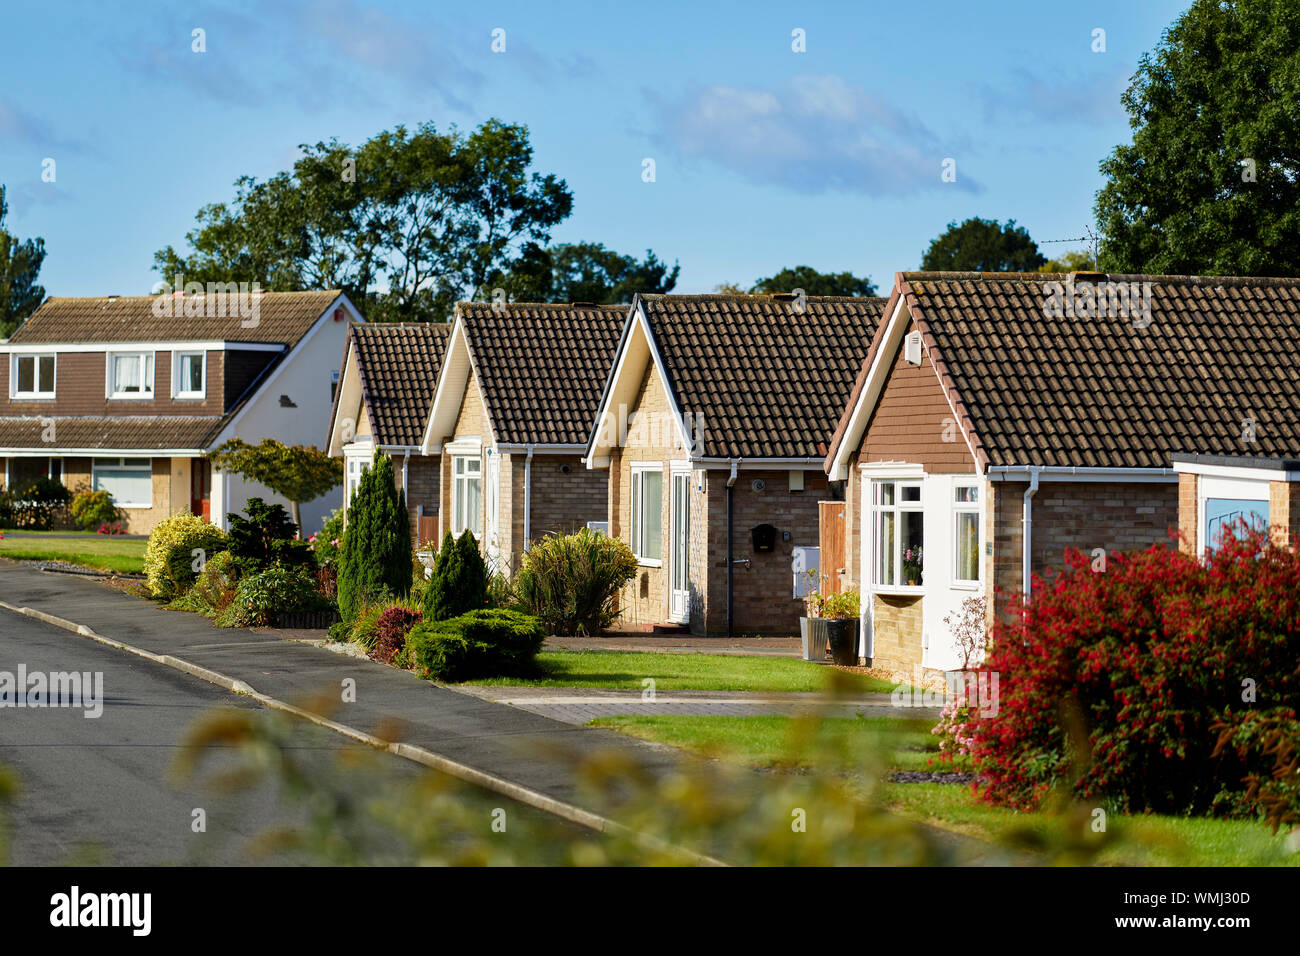 Row of Bungalow houses in a street Stock Photo